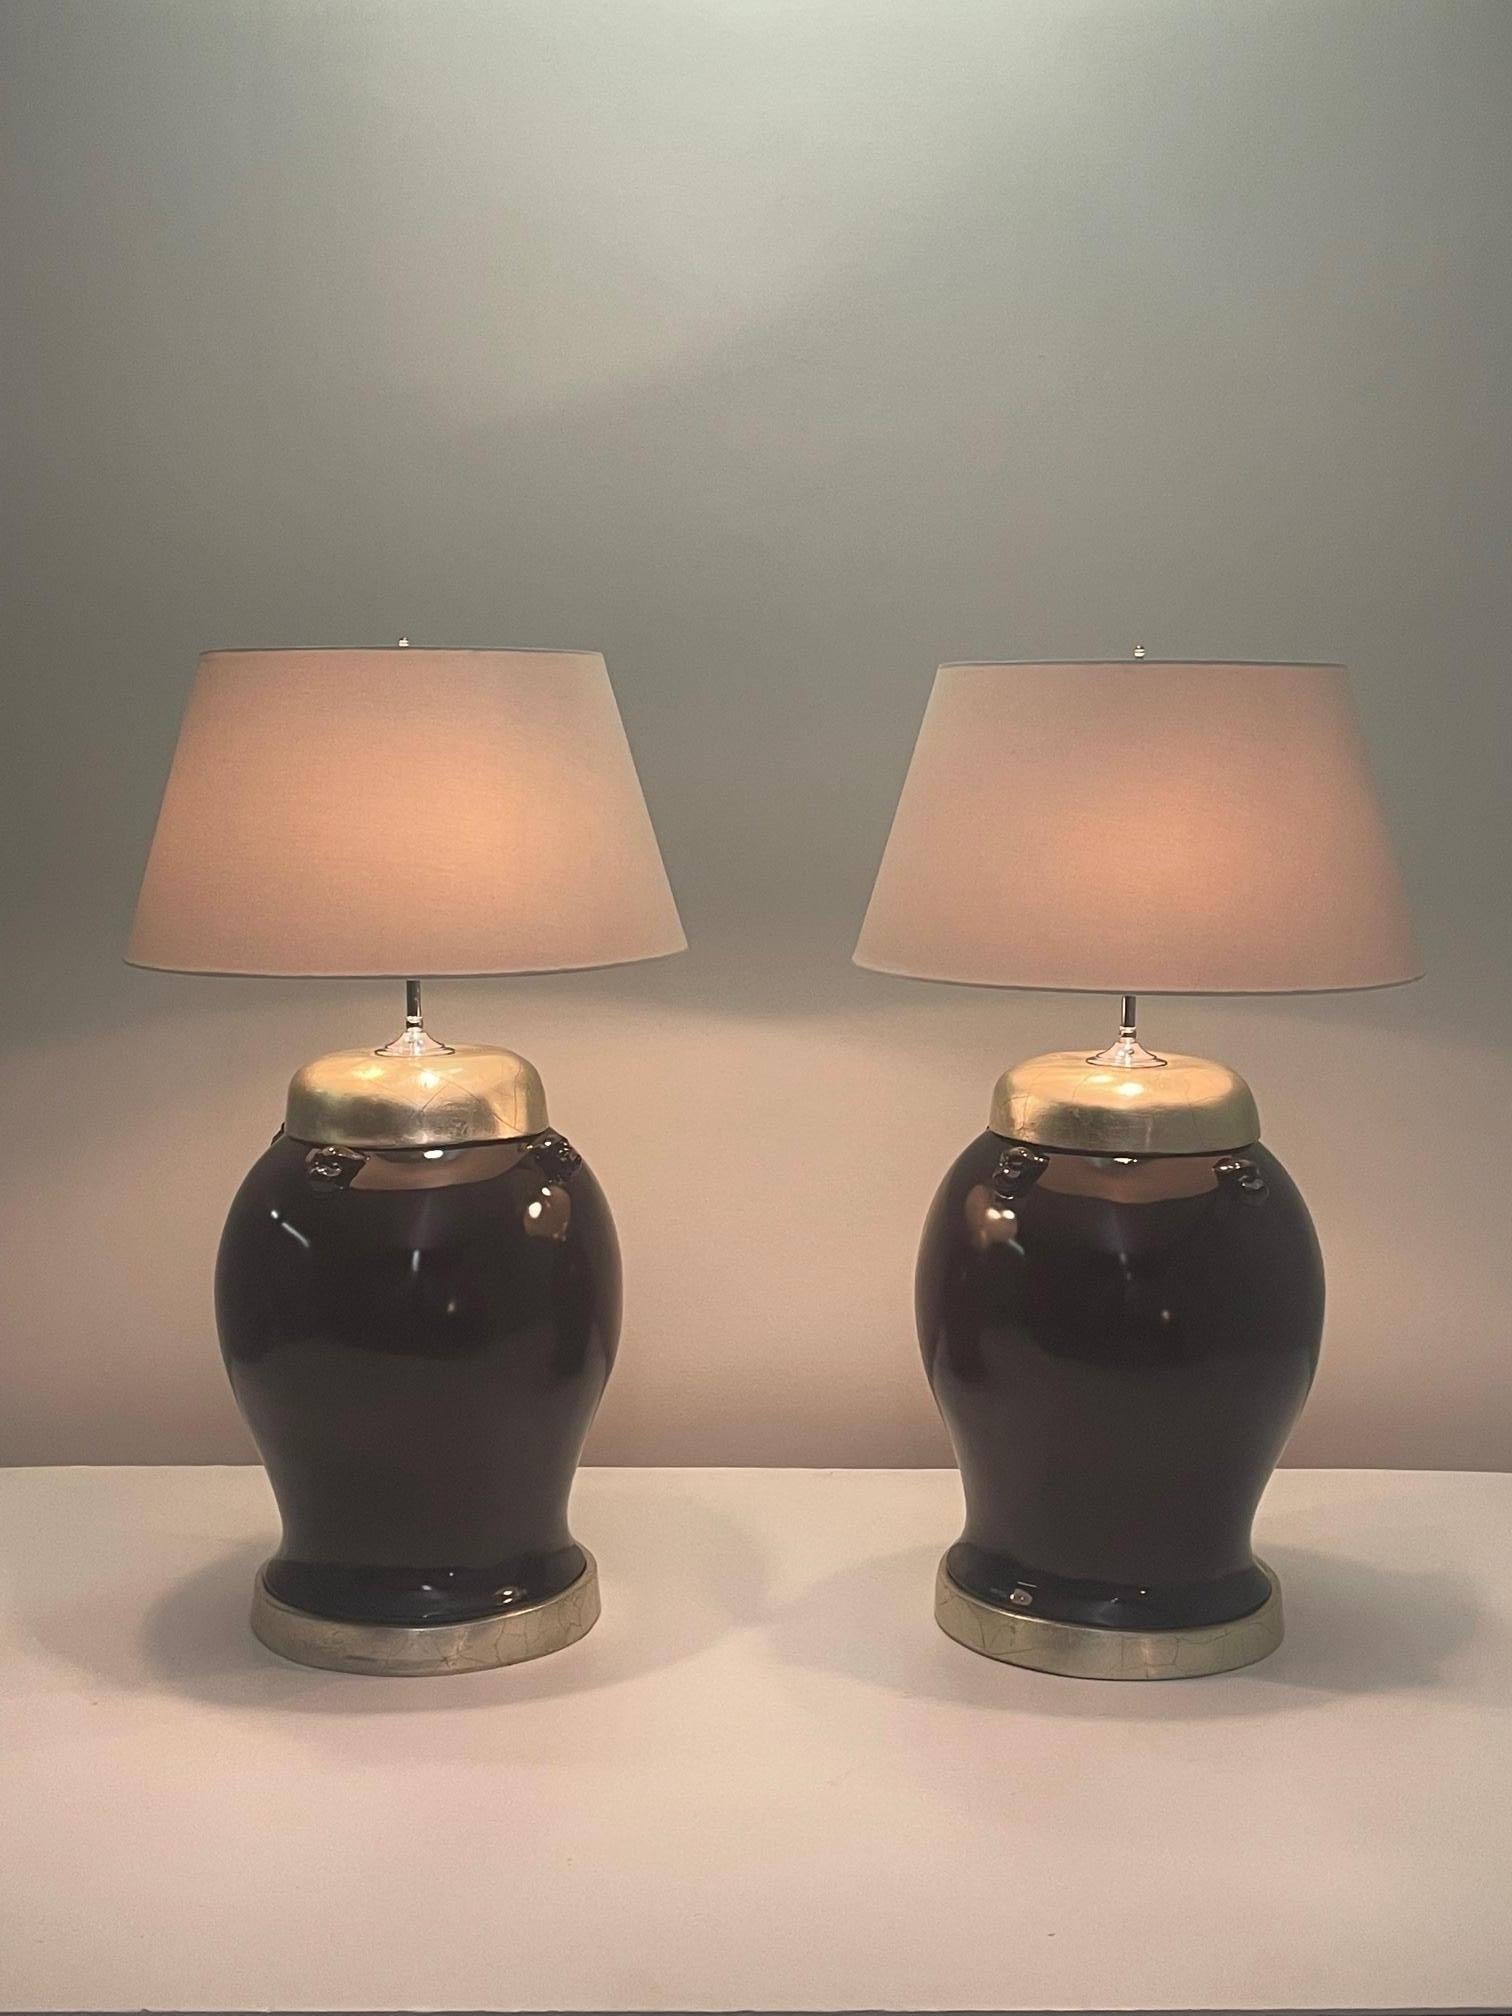 Glamorous Italian ceramic ginger jar shaped table lamps in a stunning burgundy lacquer complimented by silver leaf tops and bases. The embossed foo dog decorations add an exotic touch.
Shades not included.